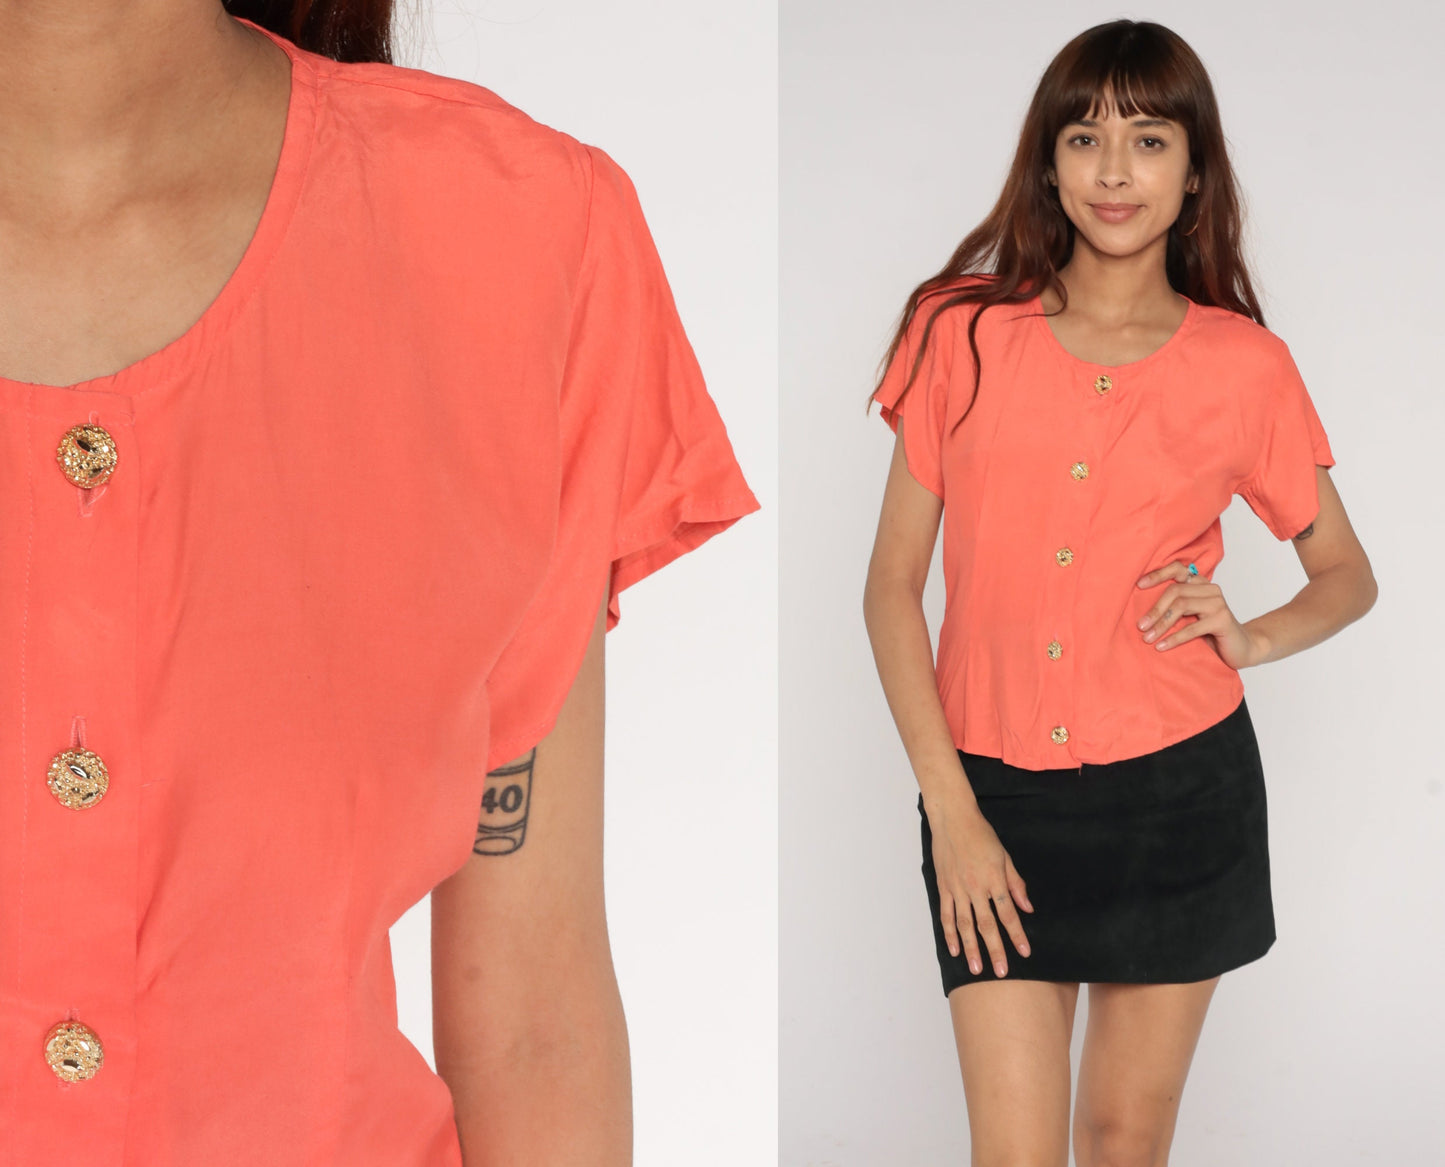 Peach Blouse 90s Button Up Top Orange Short Sleeve Shirt Retro Formal Party Cocktail Glam Tailored Top Vintage 1990s Anxiety Small S